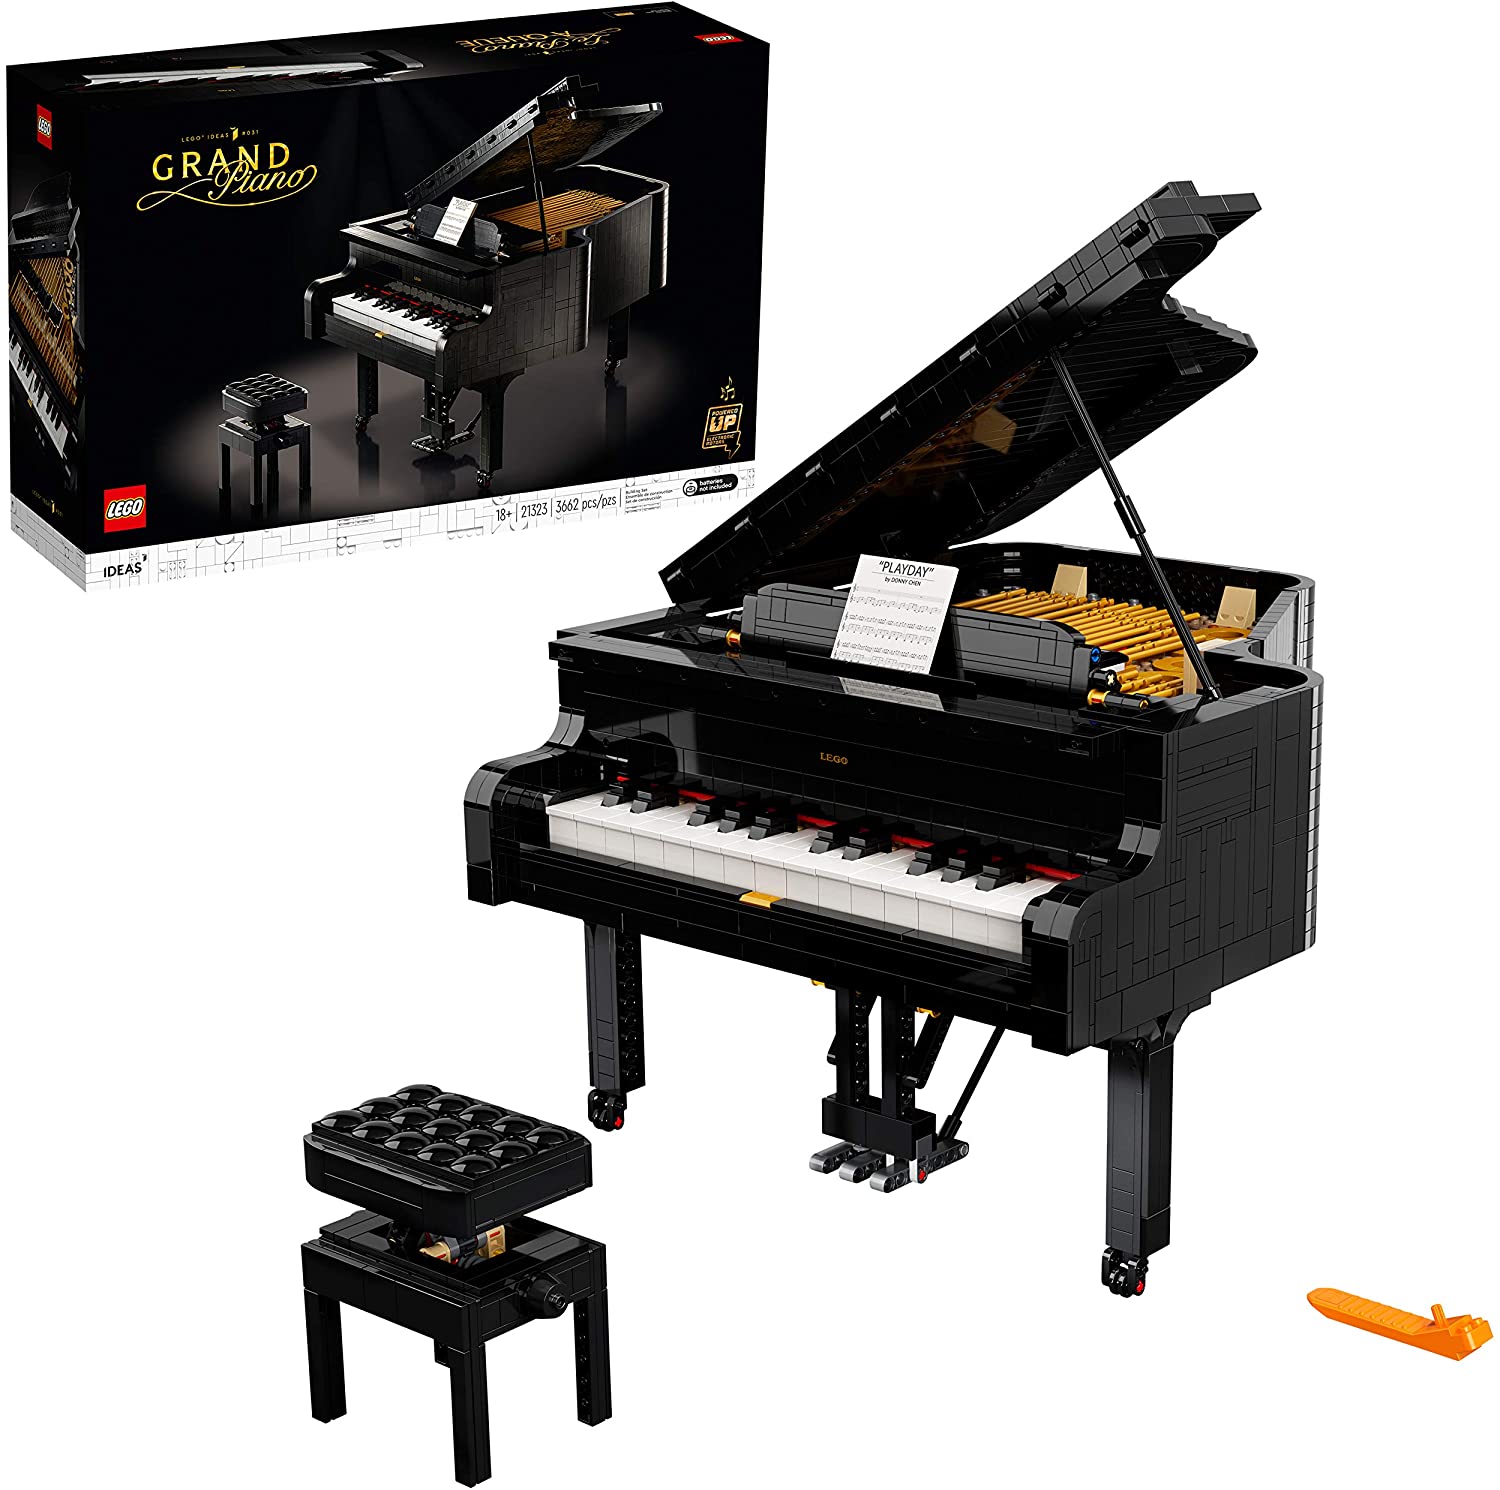 LEGO Ideas Grand Piano 21323 Model Building Kit $349.99 IN STOCK Free Shipping